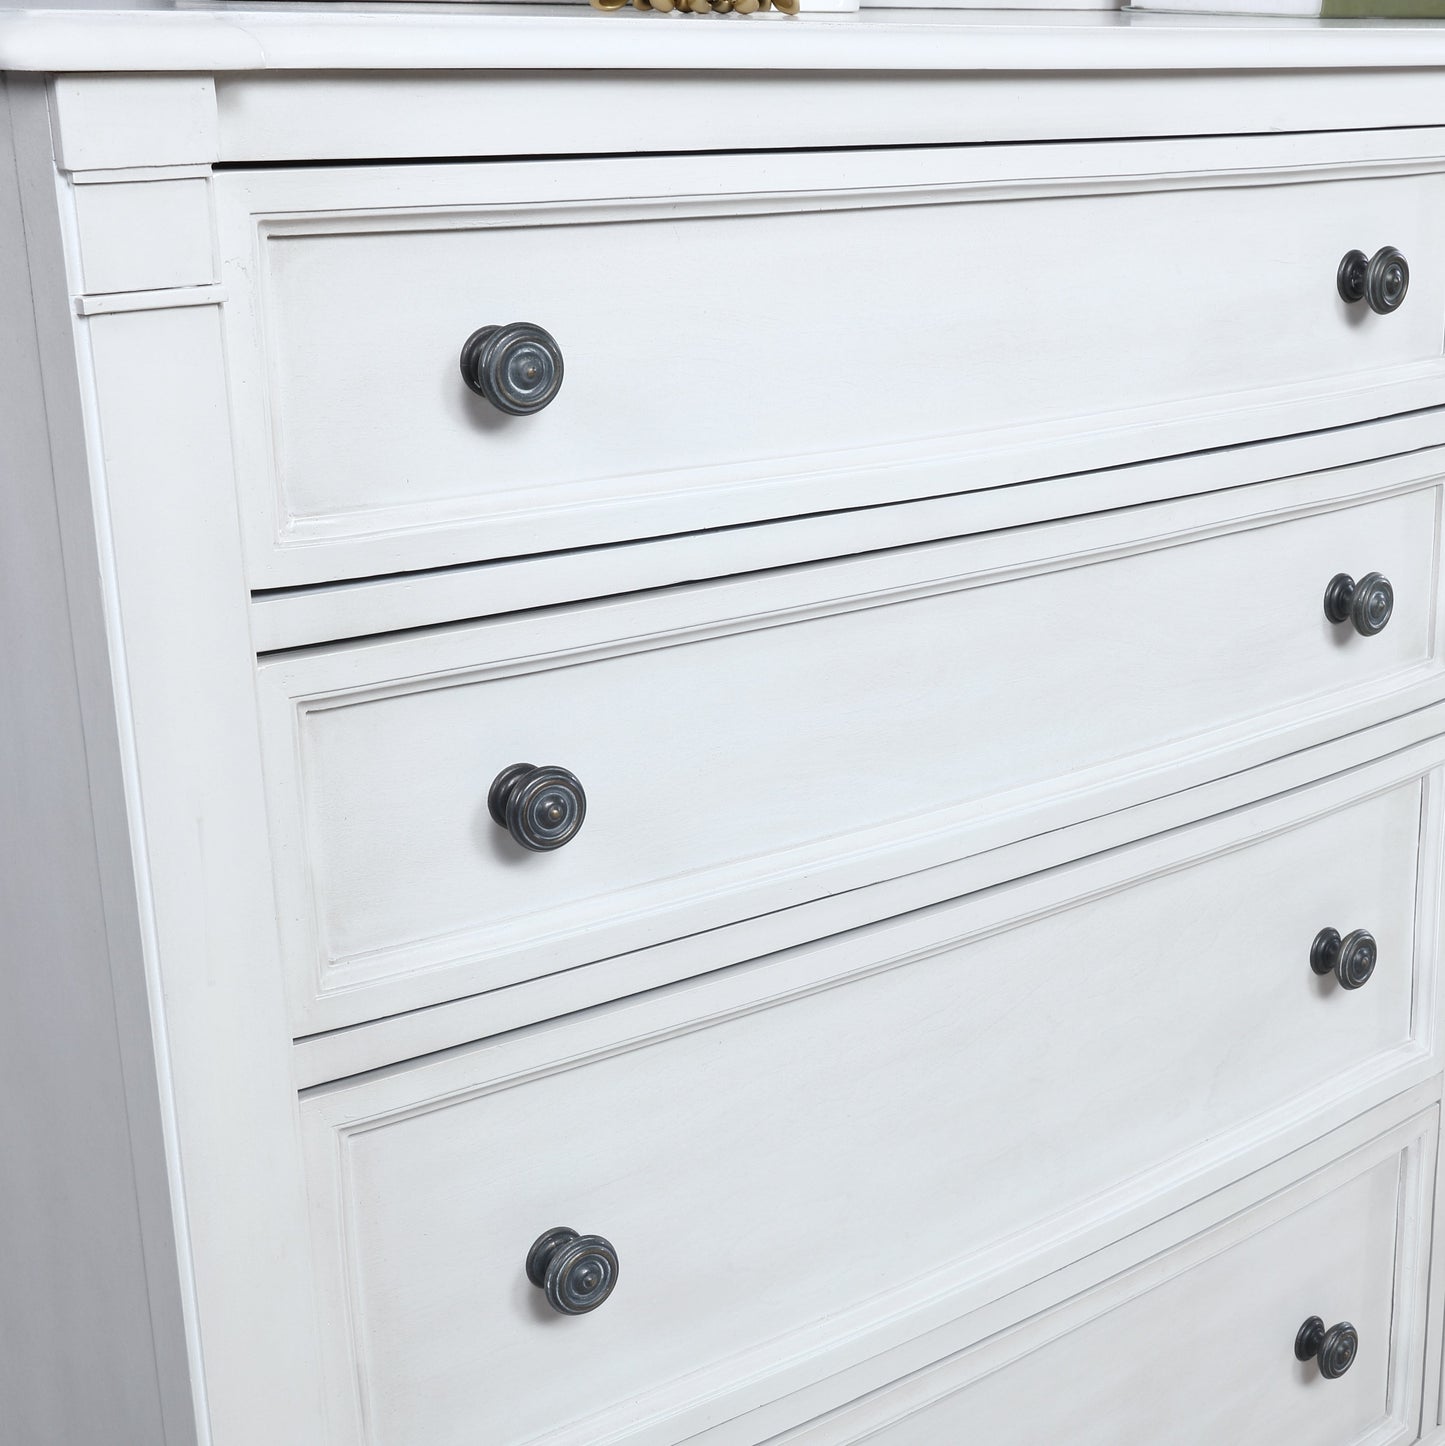 Saline Wood Planked Style 5-Drawer Chest in White Finish